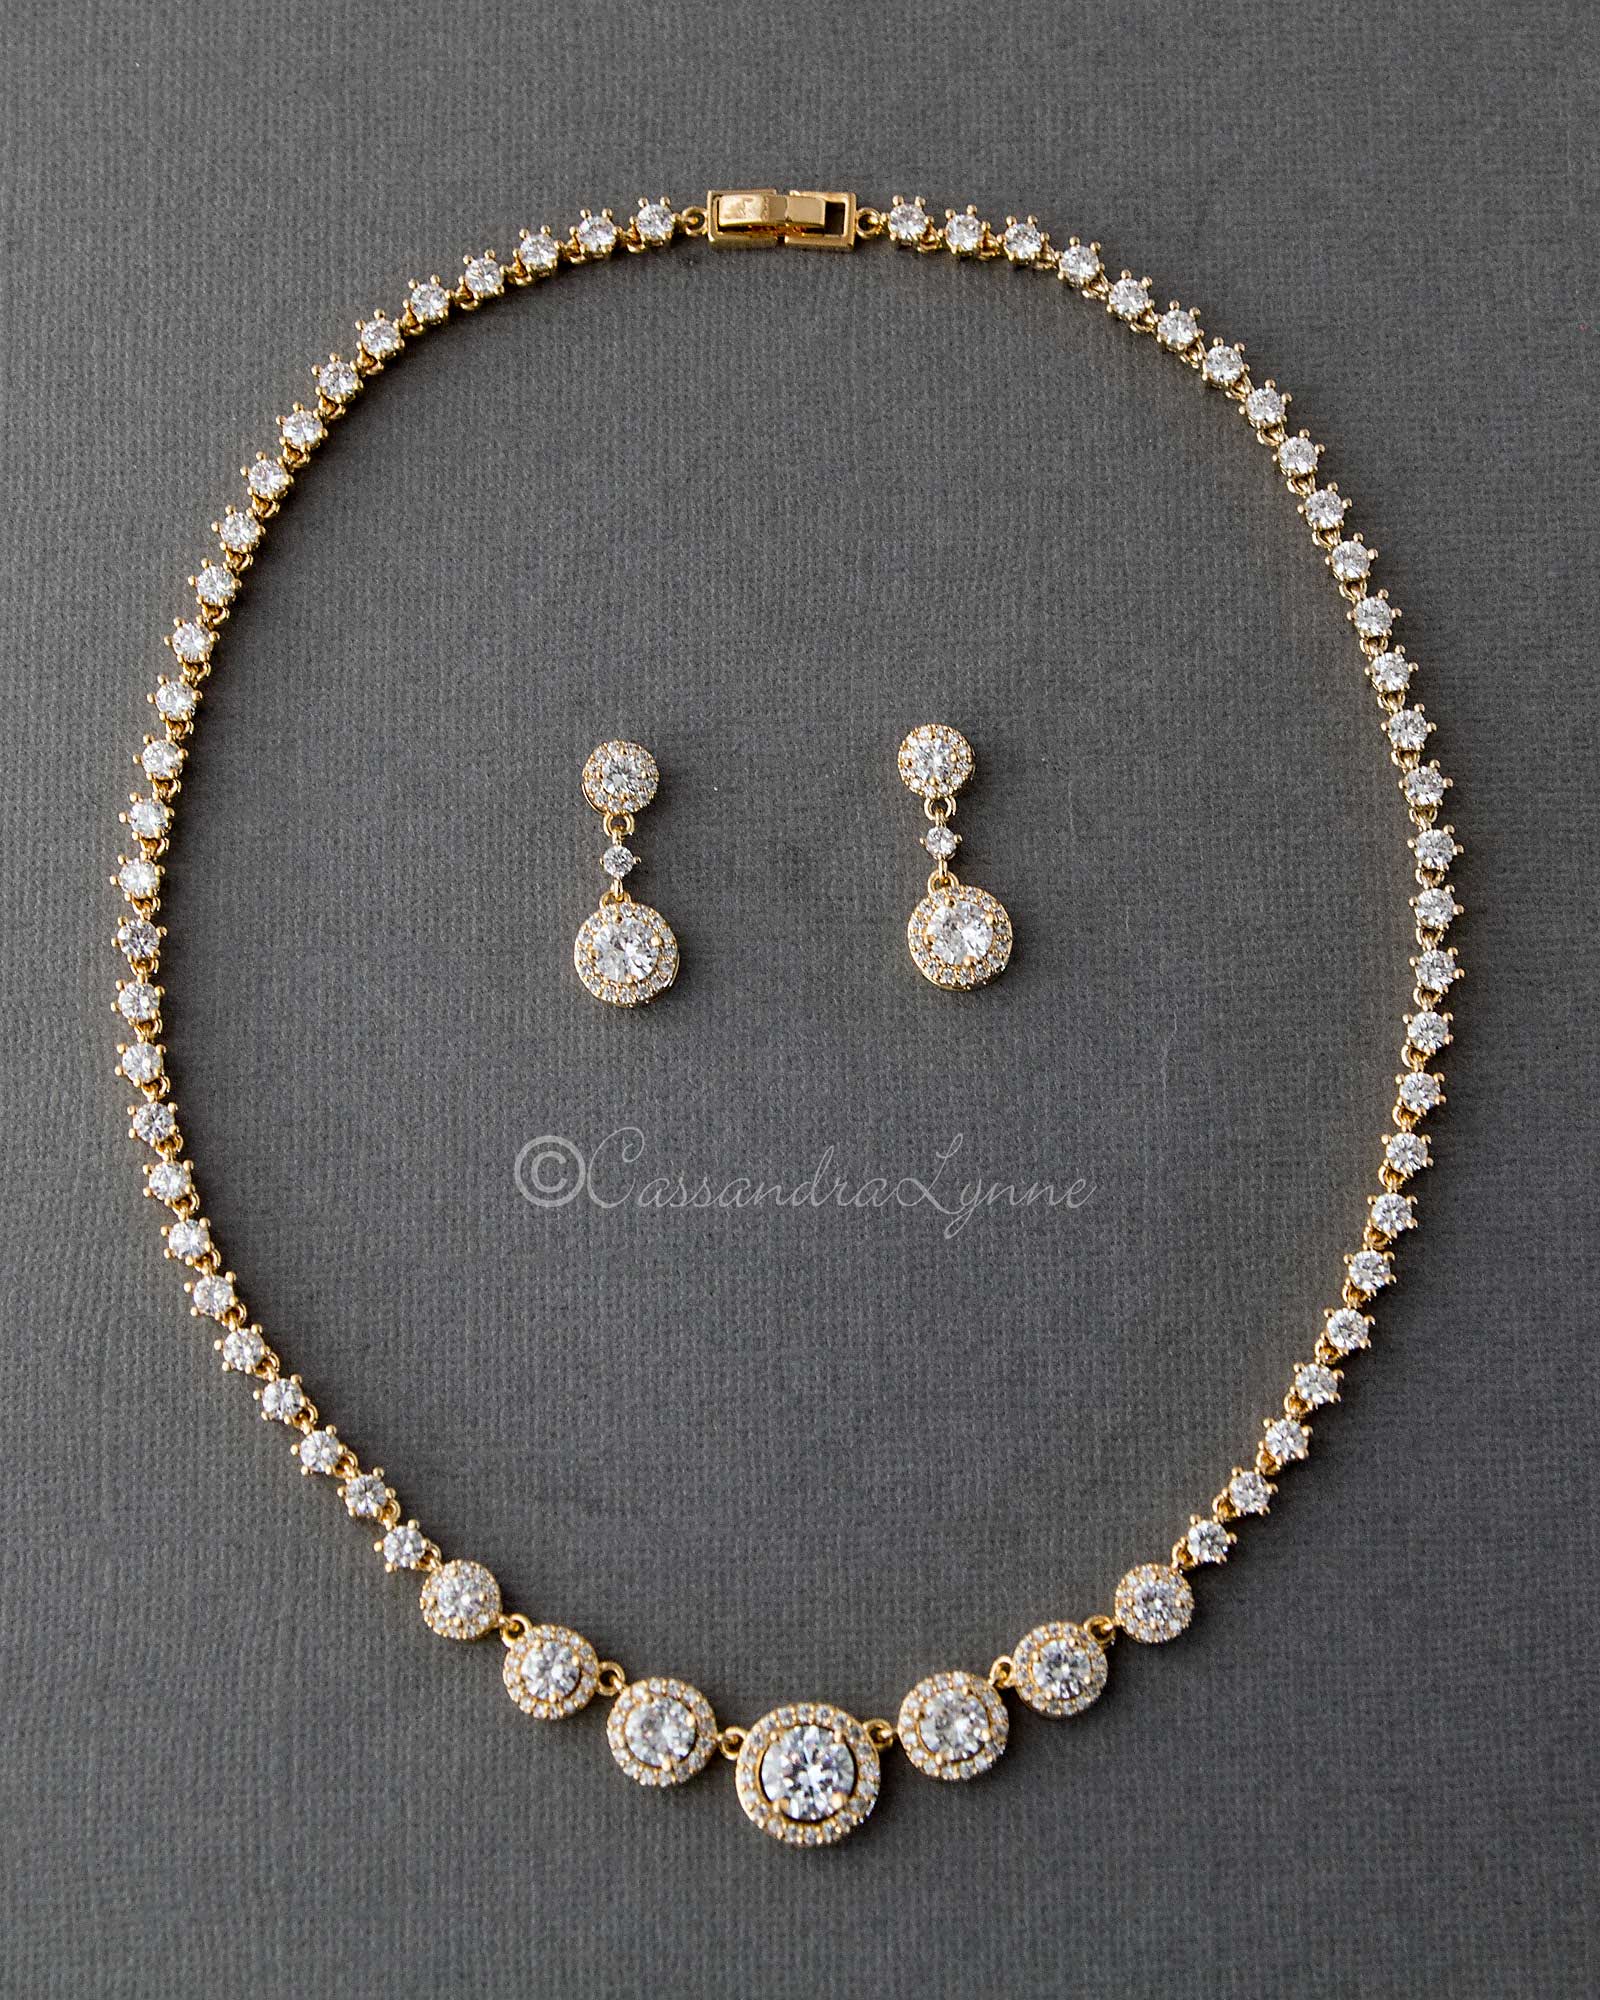 Halo Circles CZ Bridal Necklace and Earrings - Cassandra Lynne